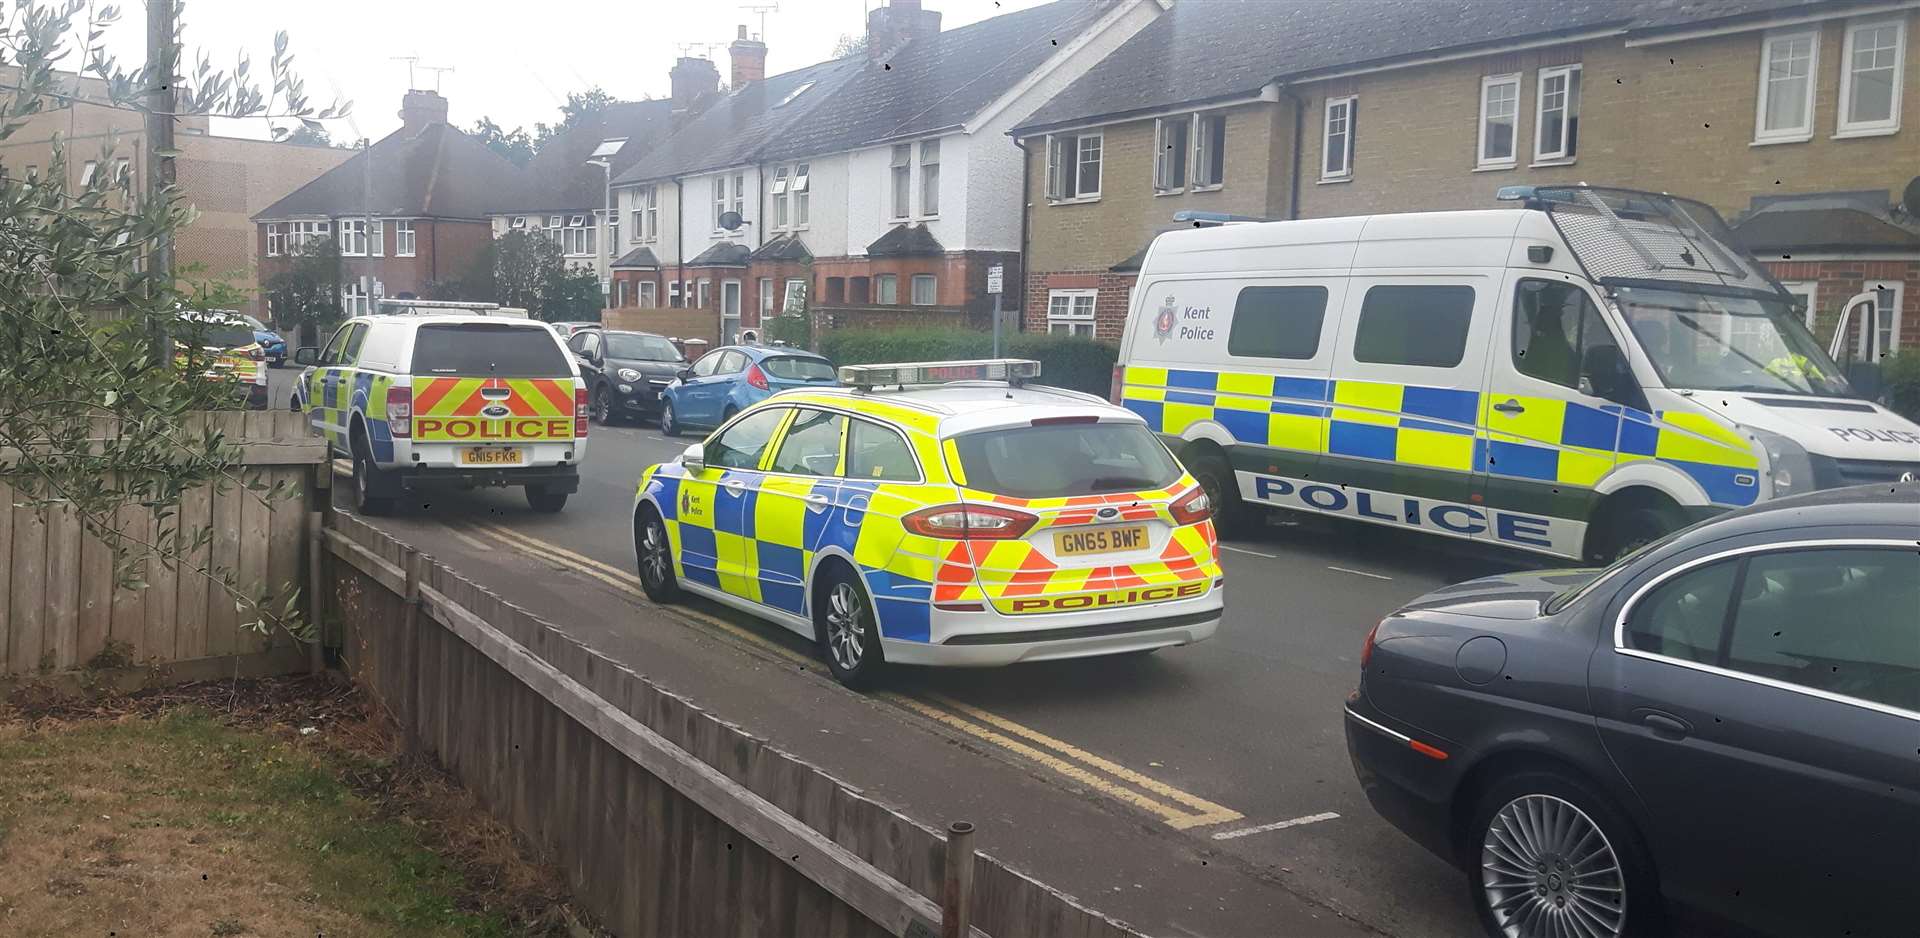 Police carried out raids across the south east on Wednesday - including here in Victoria Crescent, Ashford